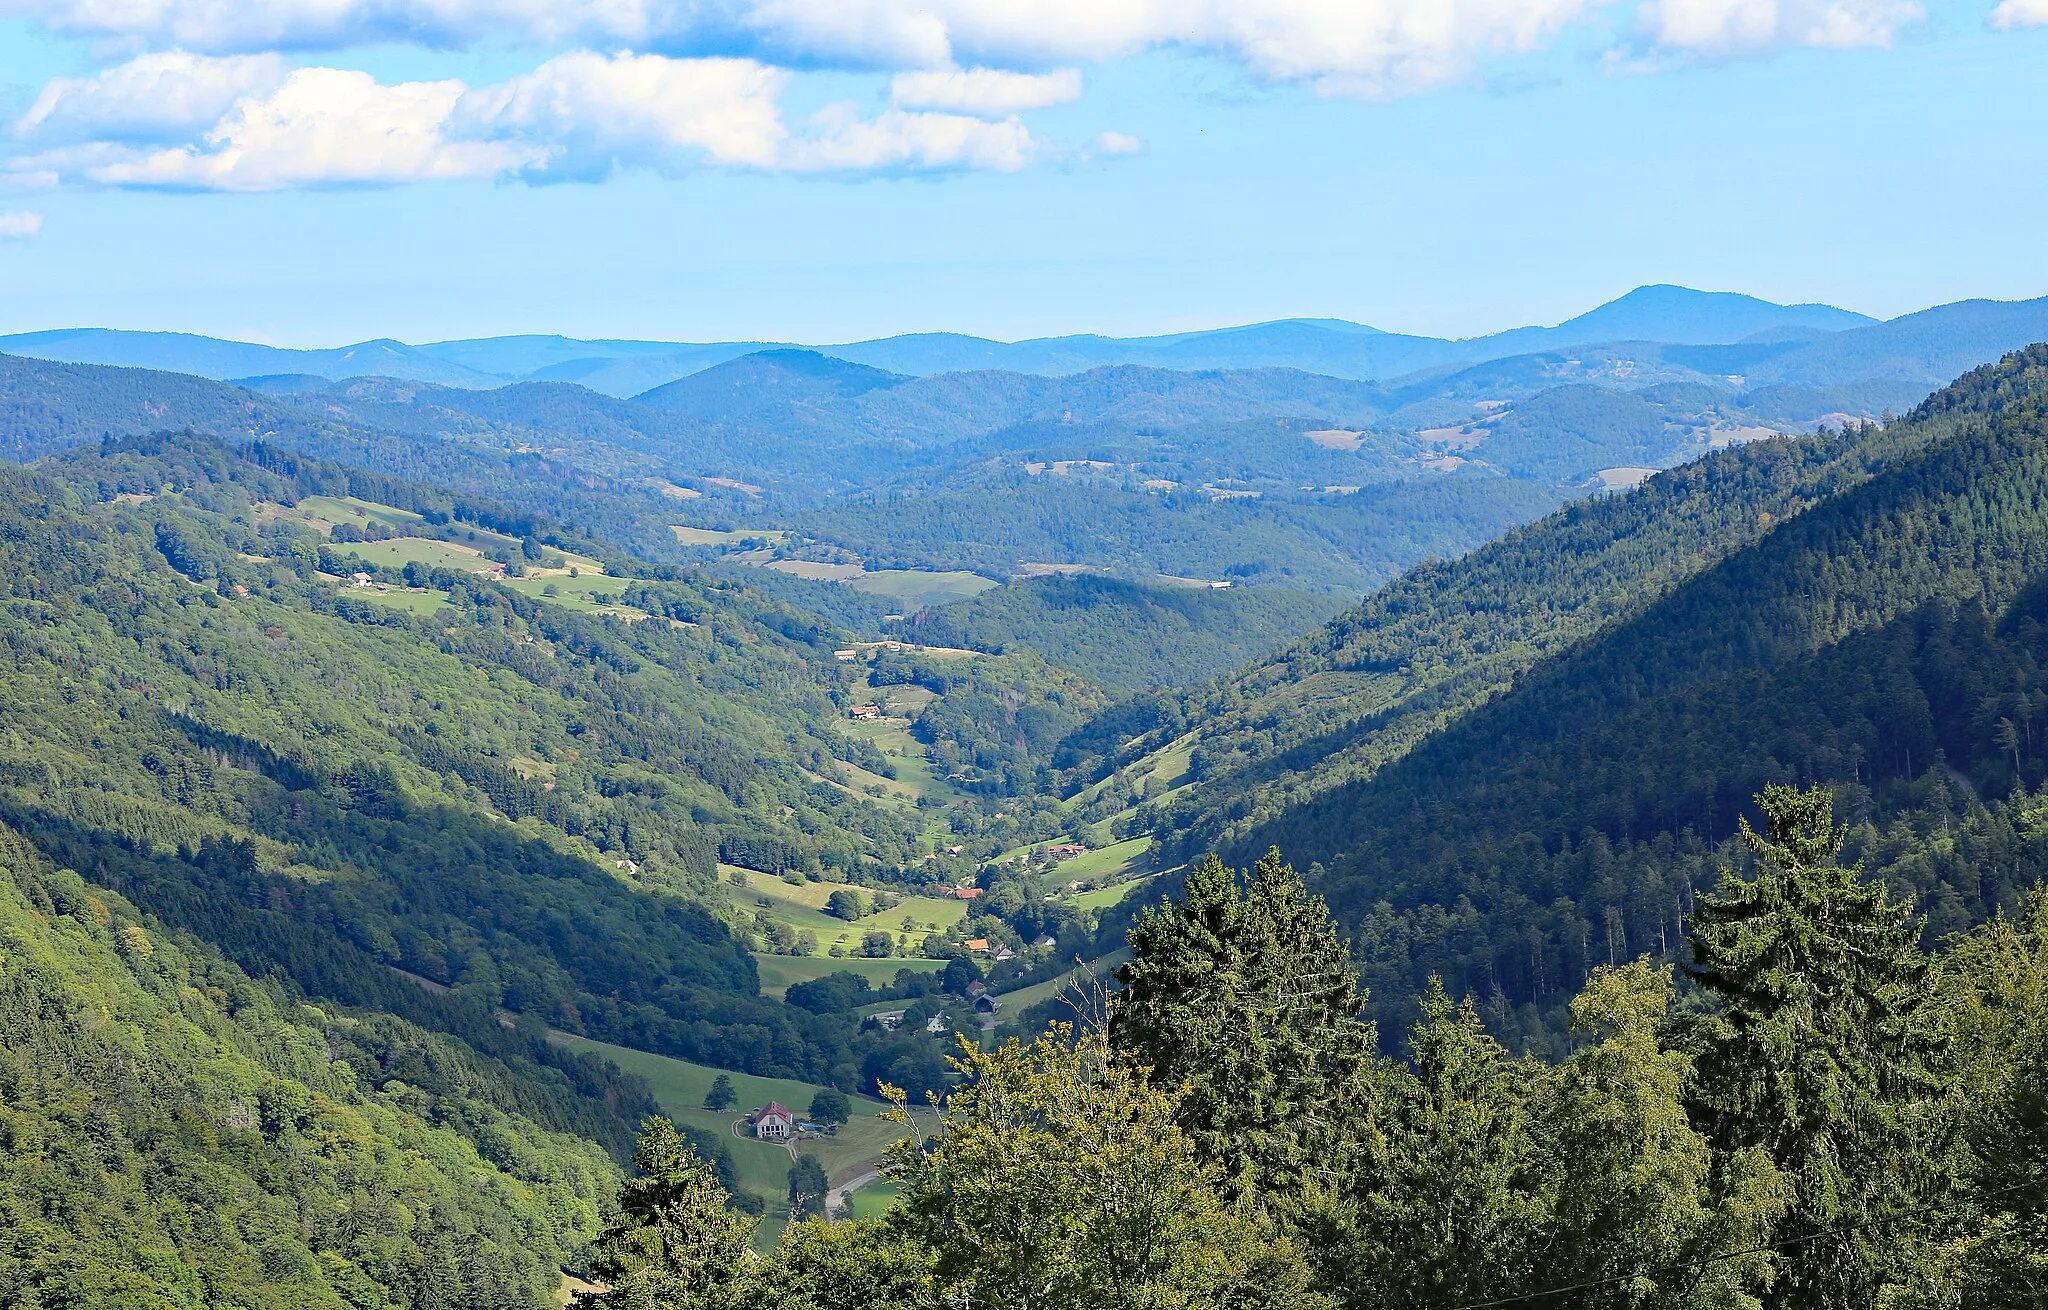 Photo showing: View of the upper Lièpvrette valley from the Col des Bagenelles. The Lièpvrette is a river that has its source on the eastern slope of the Vosges massif. The Col des Bagenelles is a French mountain pass (height 903 meters) in the Vosges massif in the Haut-Rhin department and Grand Est region.